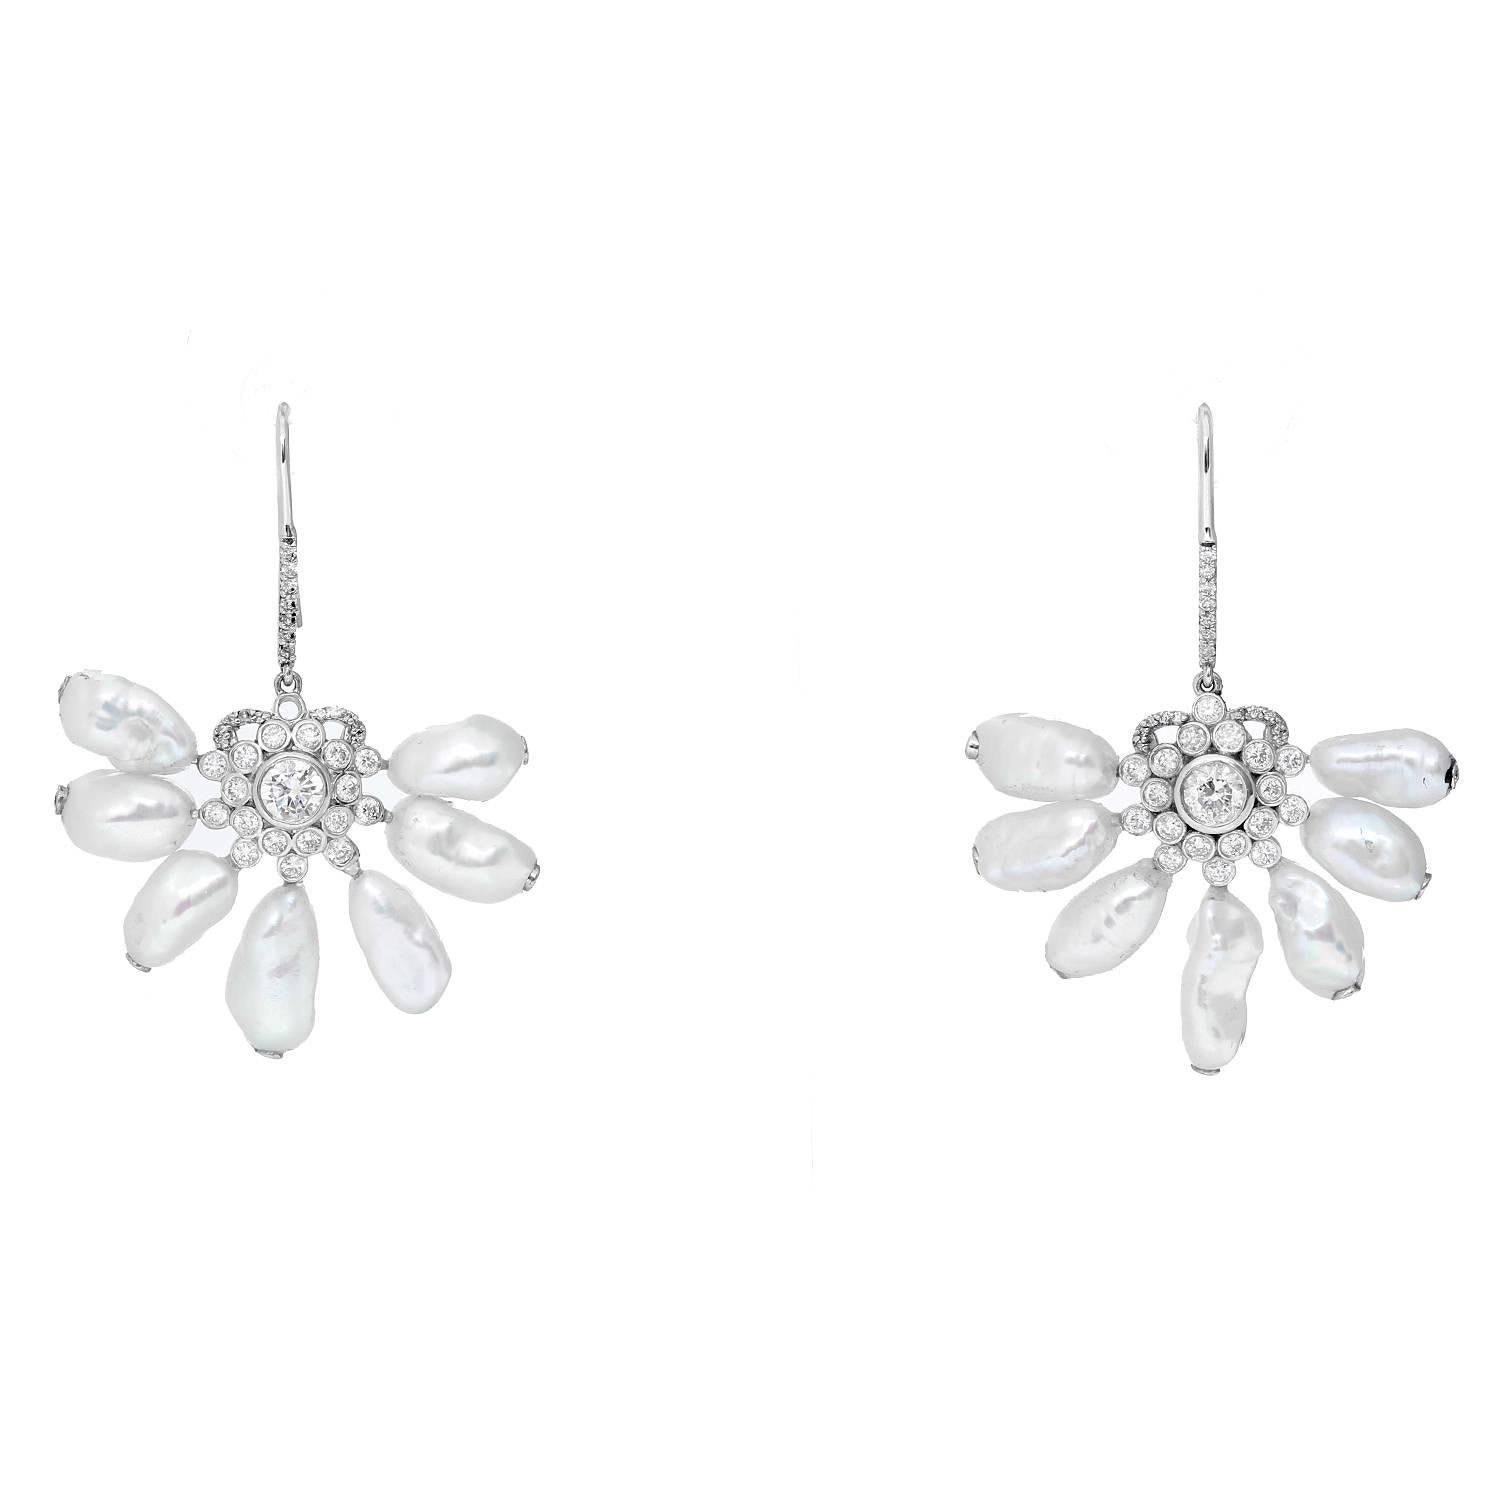 14K White Gold Pearl and Diamond Earrings - . Designer inspired dangling earrings with 7 pearl drops radiating from a diamond flower. Total weight 11.7 grams.